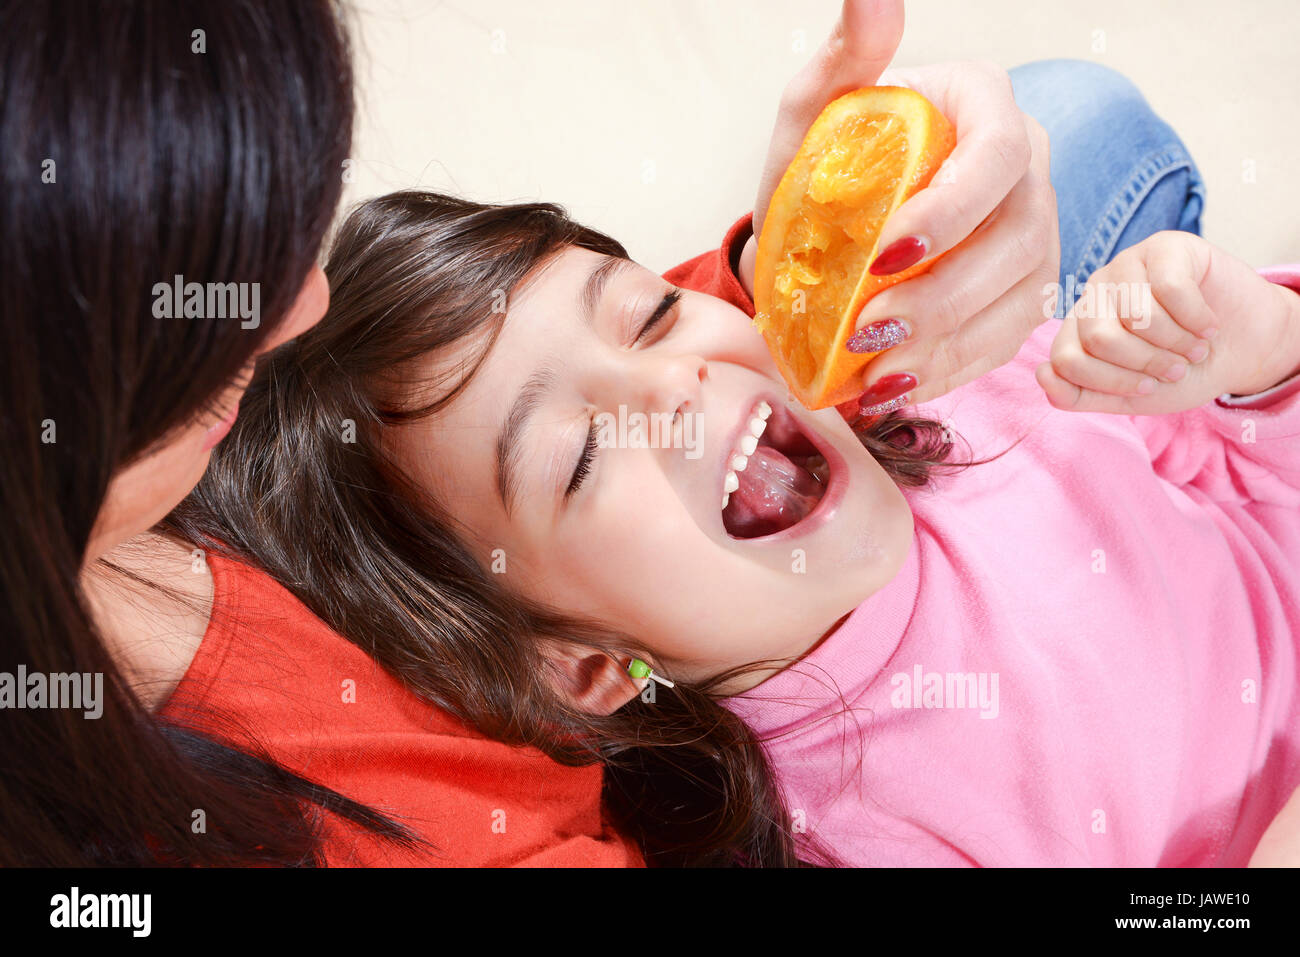 Caucasian baby girl with dark hair, drinking juice direct from an orange. Concept of healthy food Stock Photo